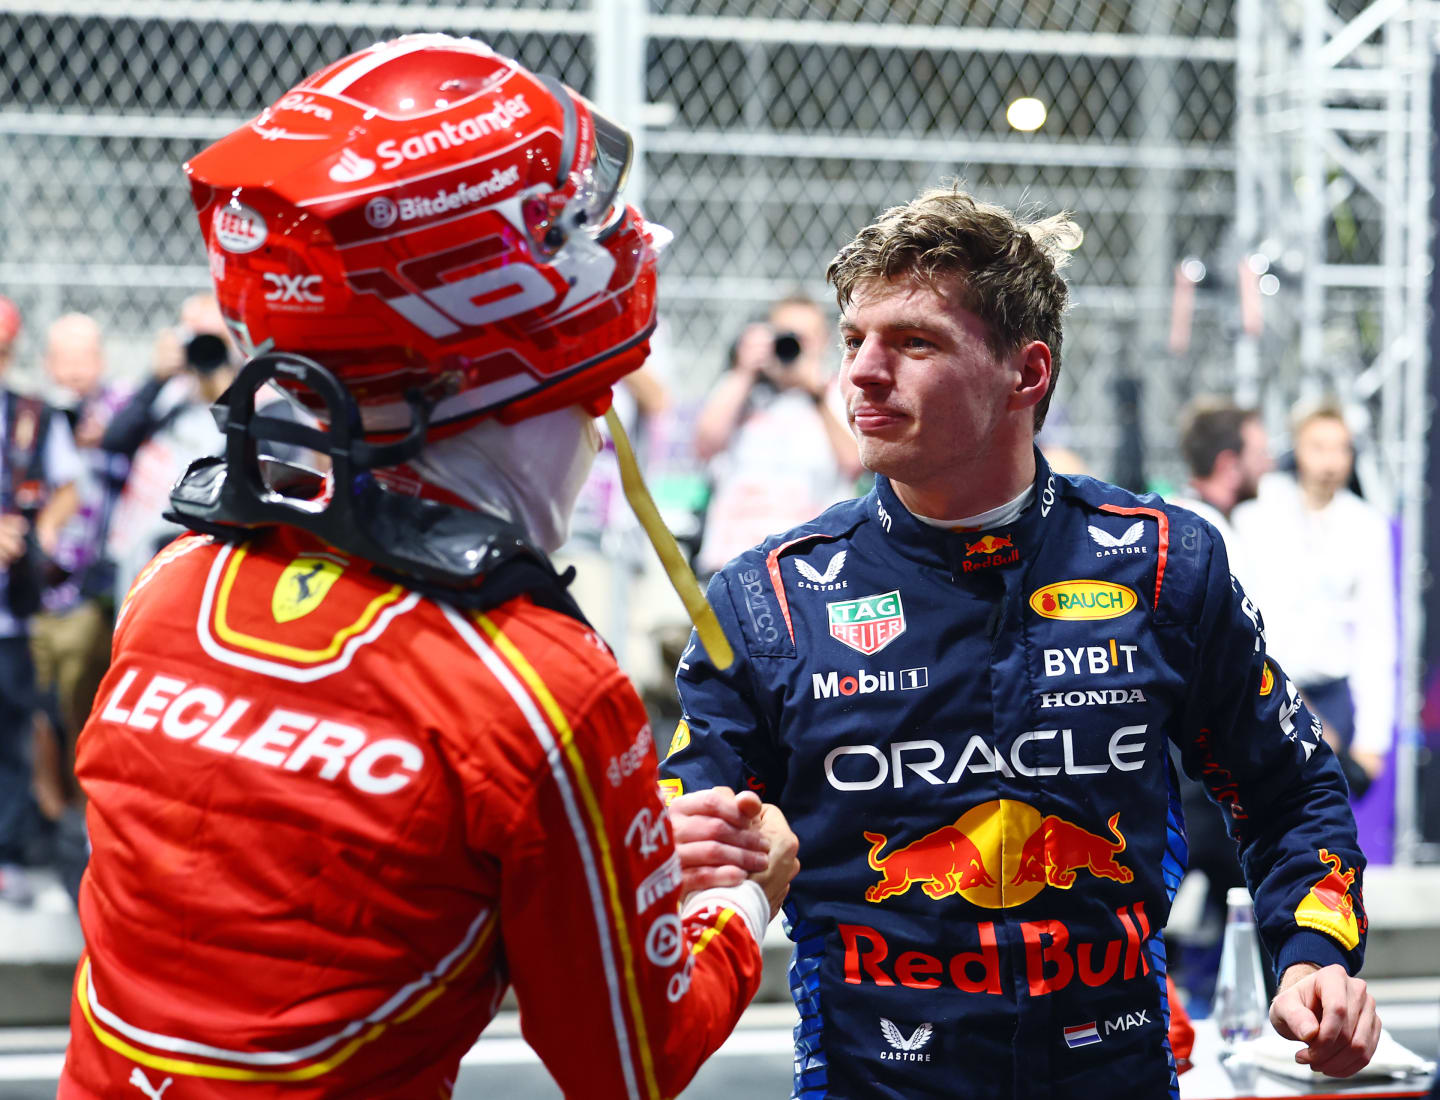 JEDDAH, SAUDI ARABIA - MARCH 08: Pole position qualifier Max Verstappen of the Netherlands and